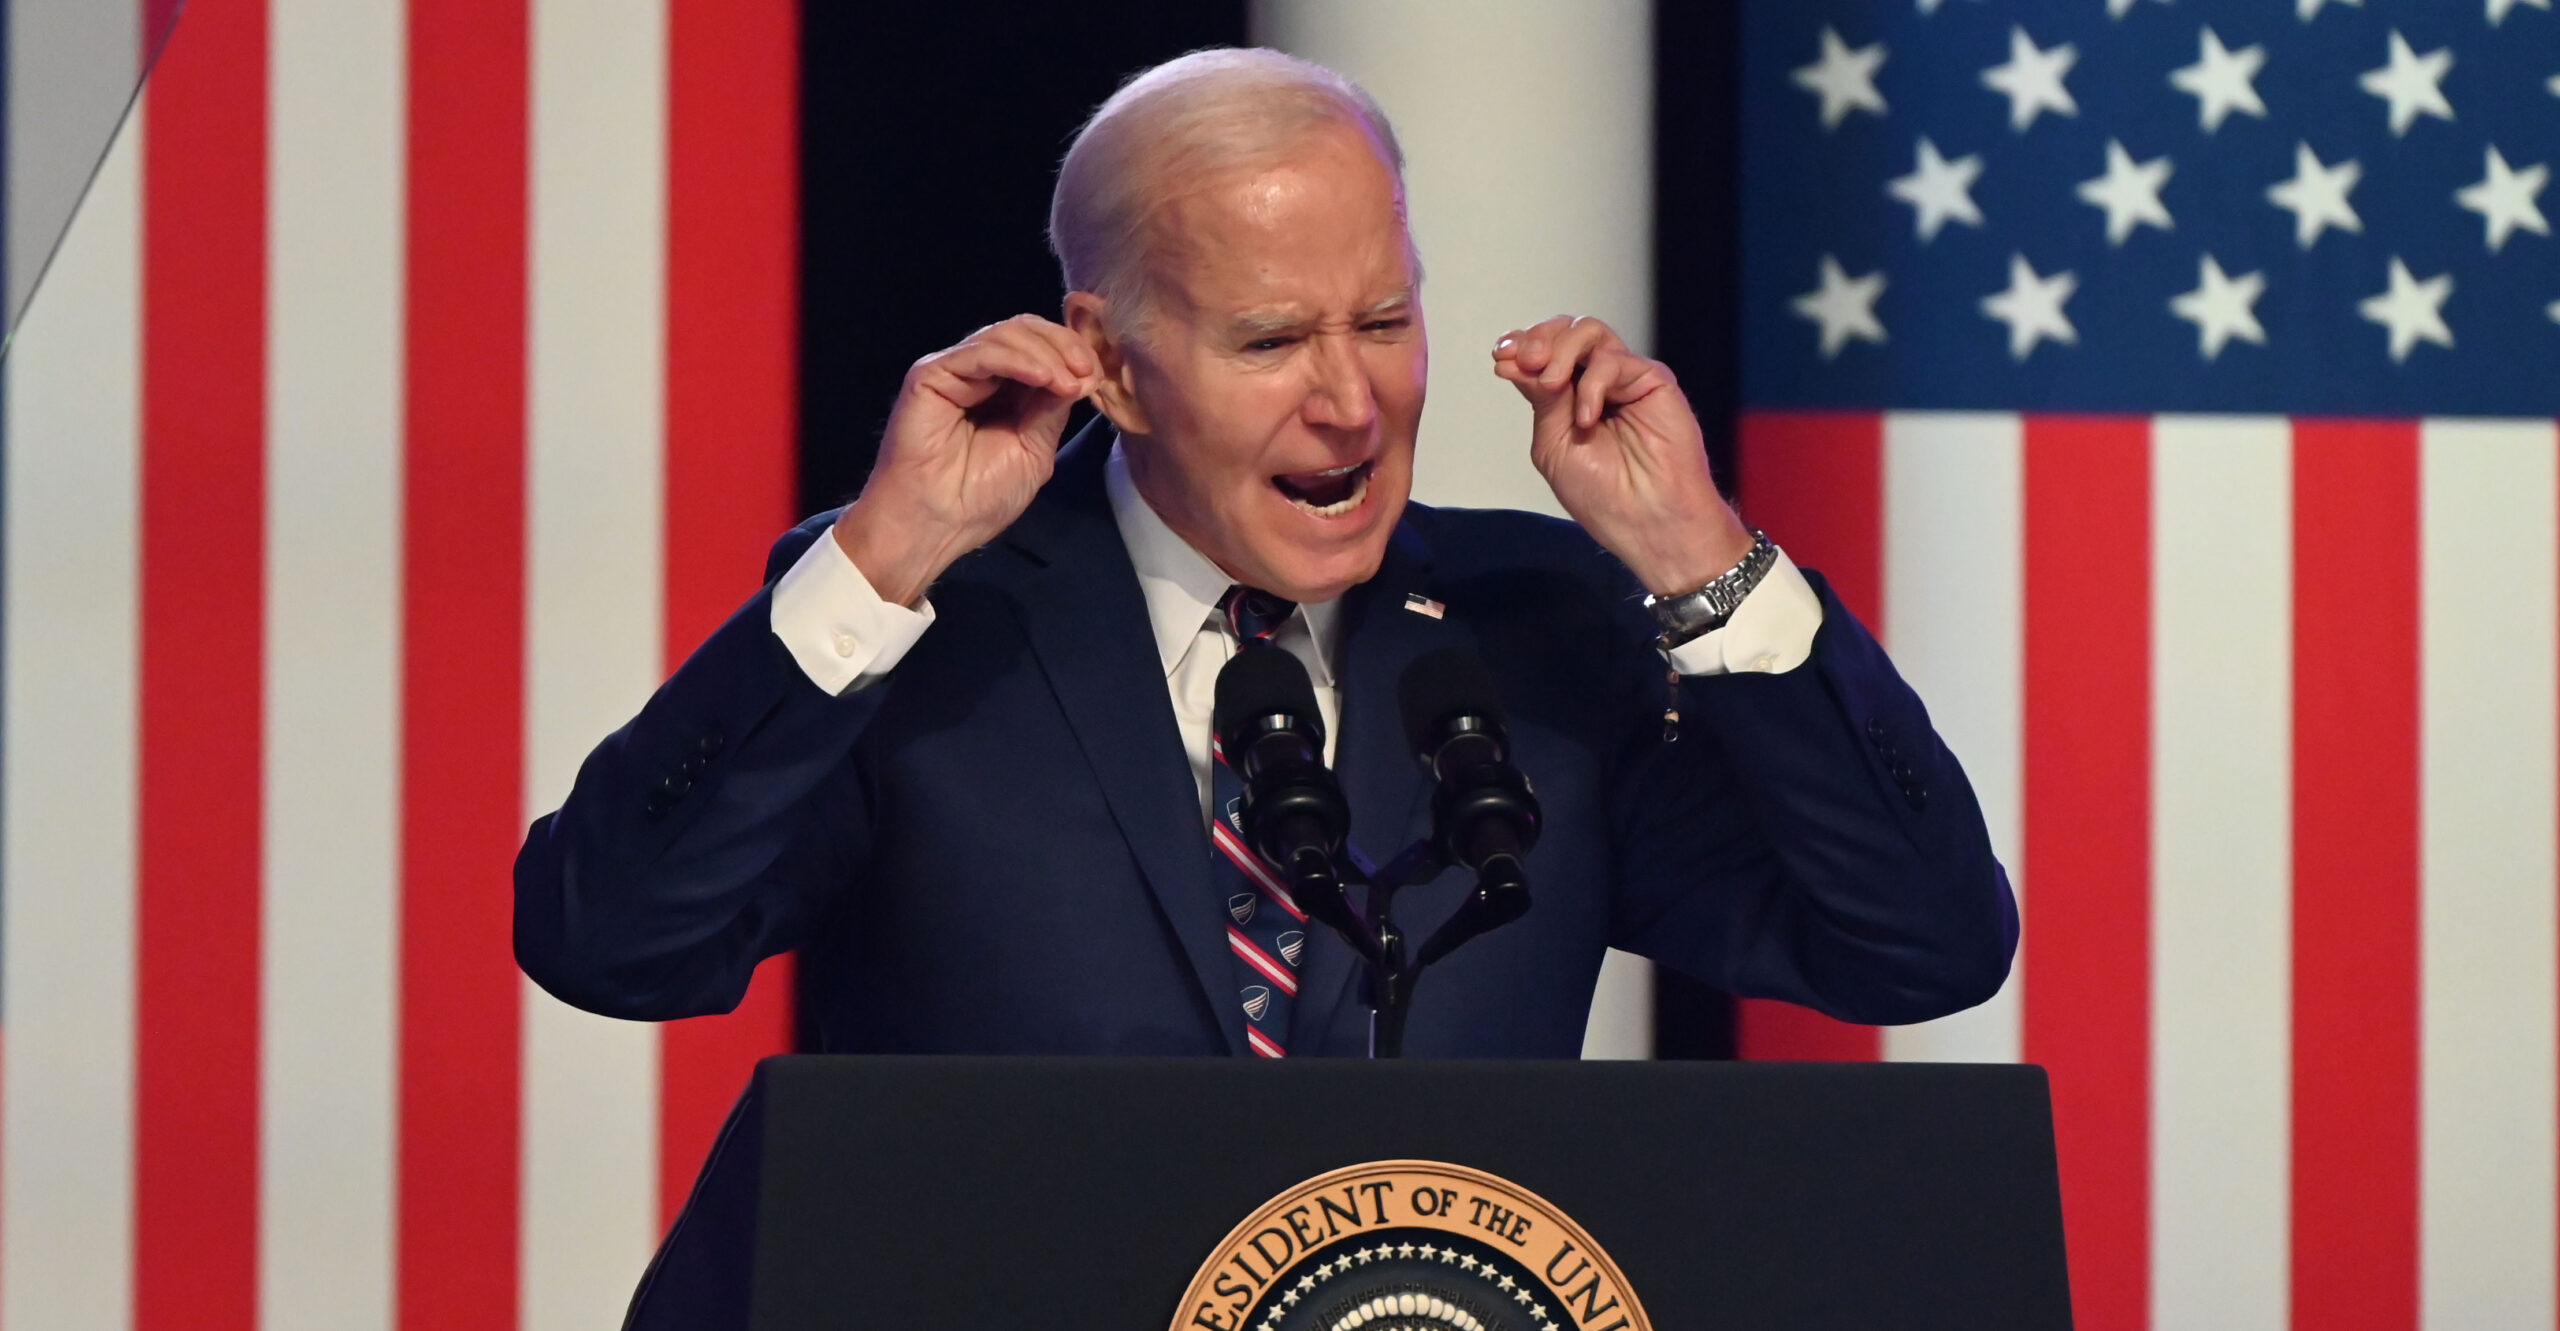 Fact-Checking 4 Biden Claims in Valley Forge Speech